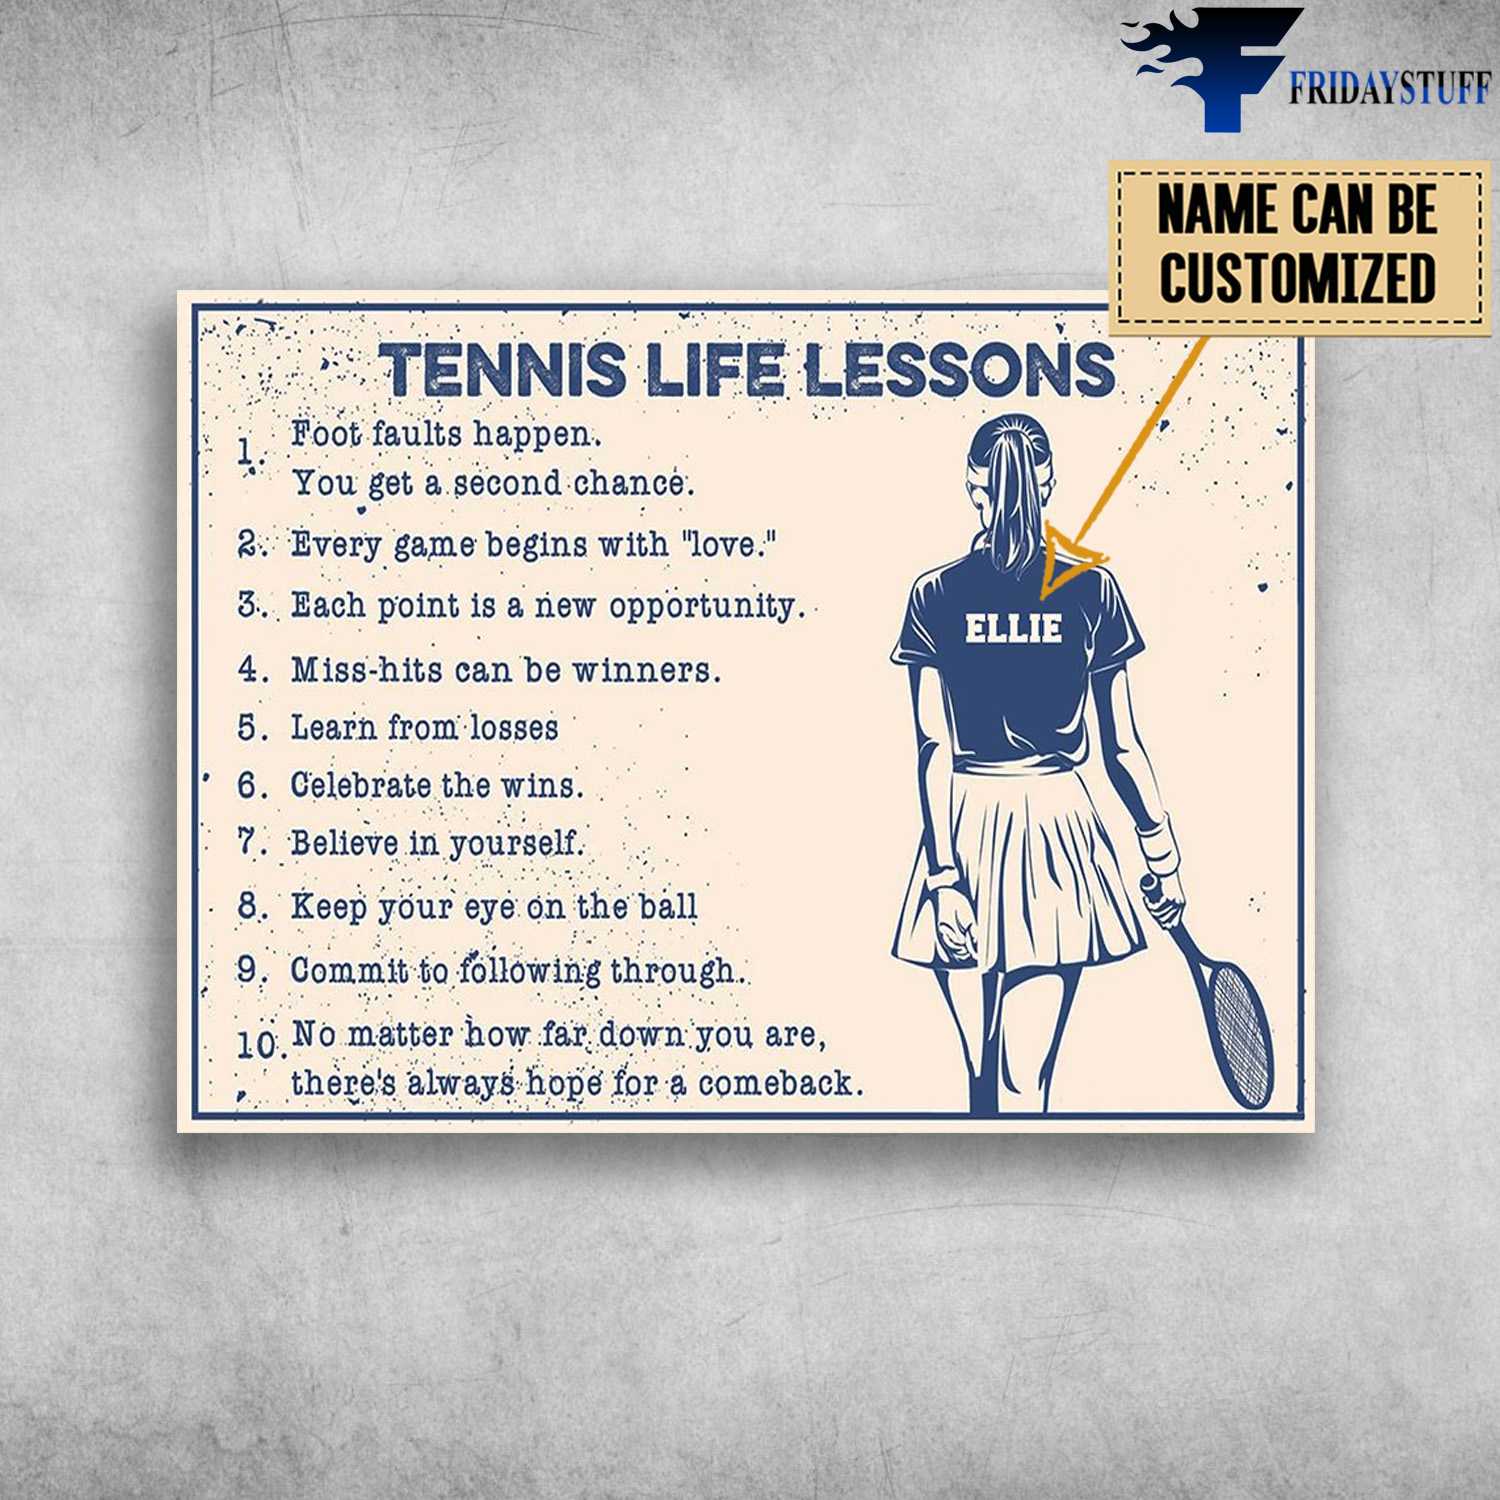 Tennis Life Lessons, Tennis Lover, Foot Faults Happen, You Get A Second Chance, Every Game Begins With Love, Each Poinr Is A New Opportunity, Miss-Hits Can Be Winners, Learn From Losses